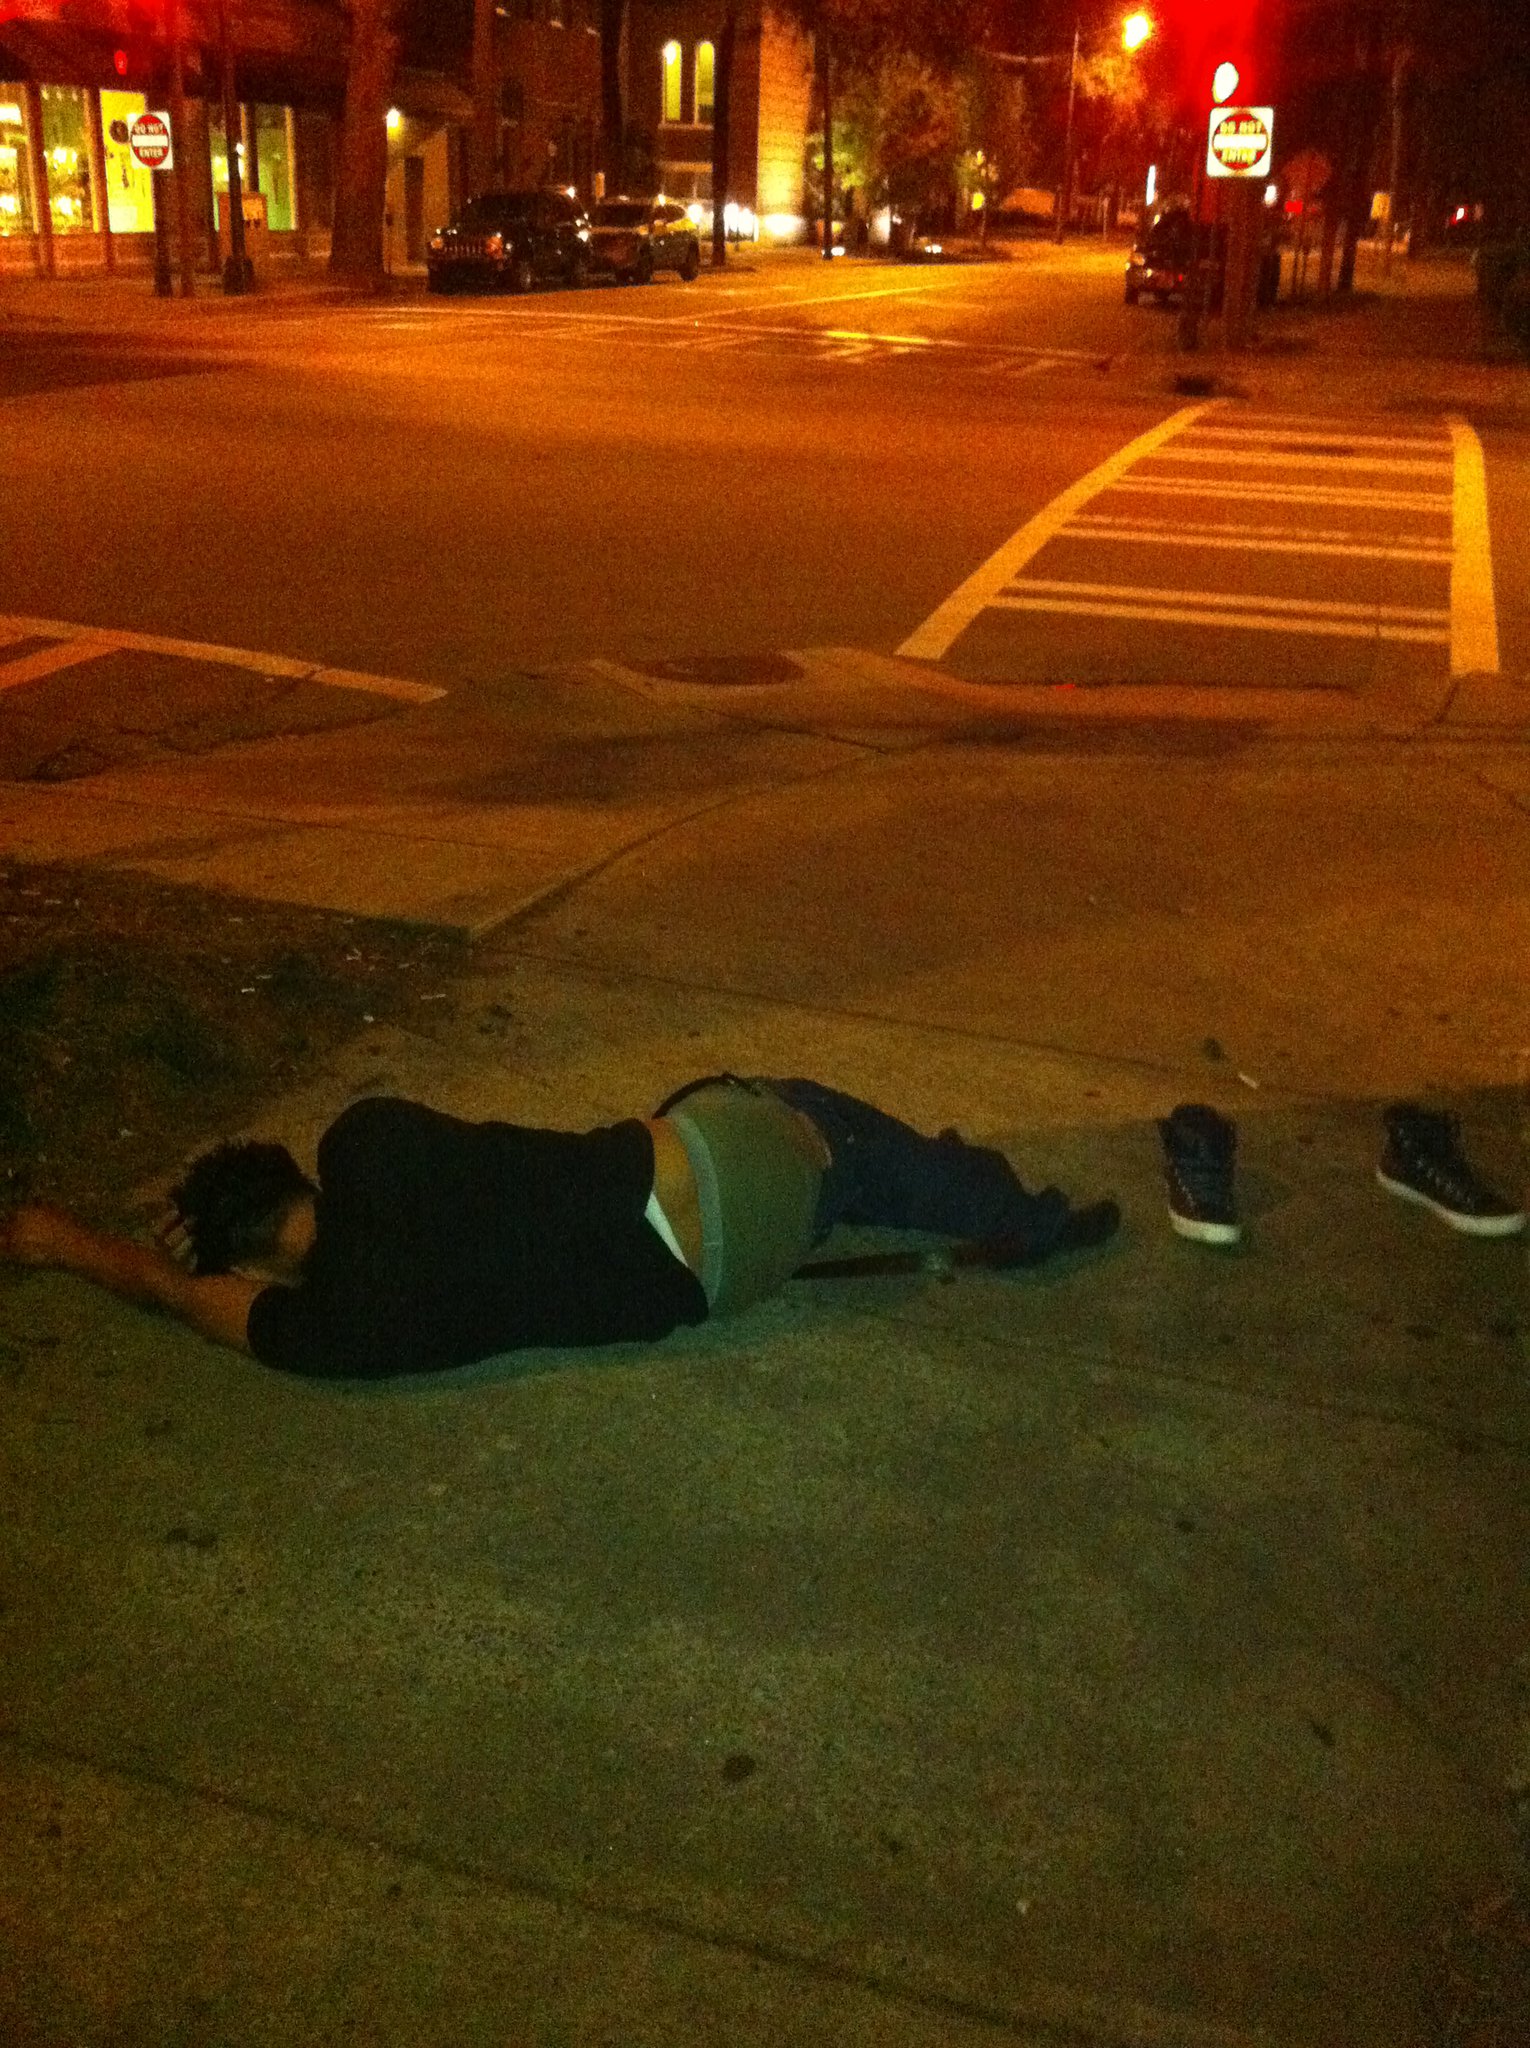 You know your drunk when you cuddle up on the sidewalk to go to sleep.. even take off your shoes!